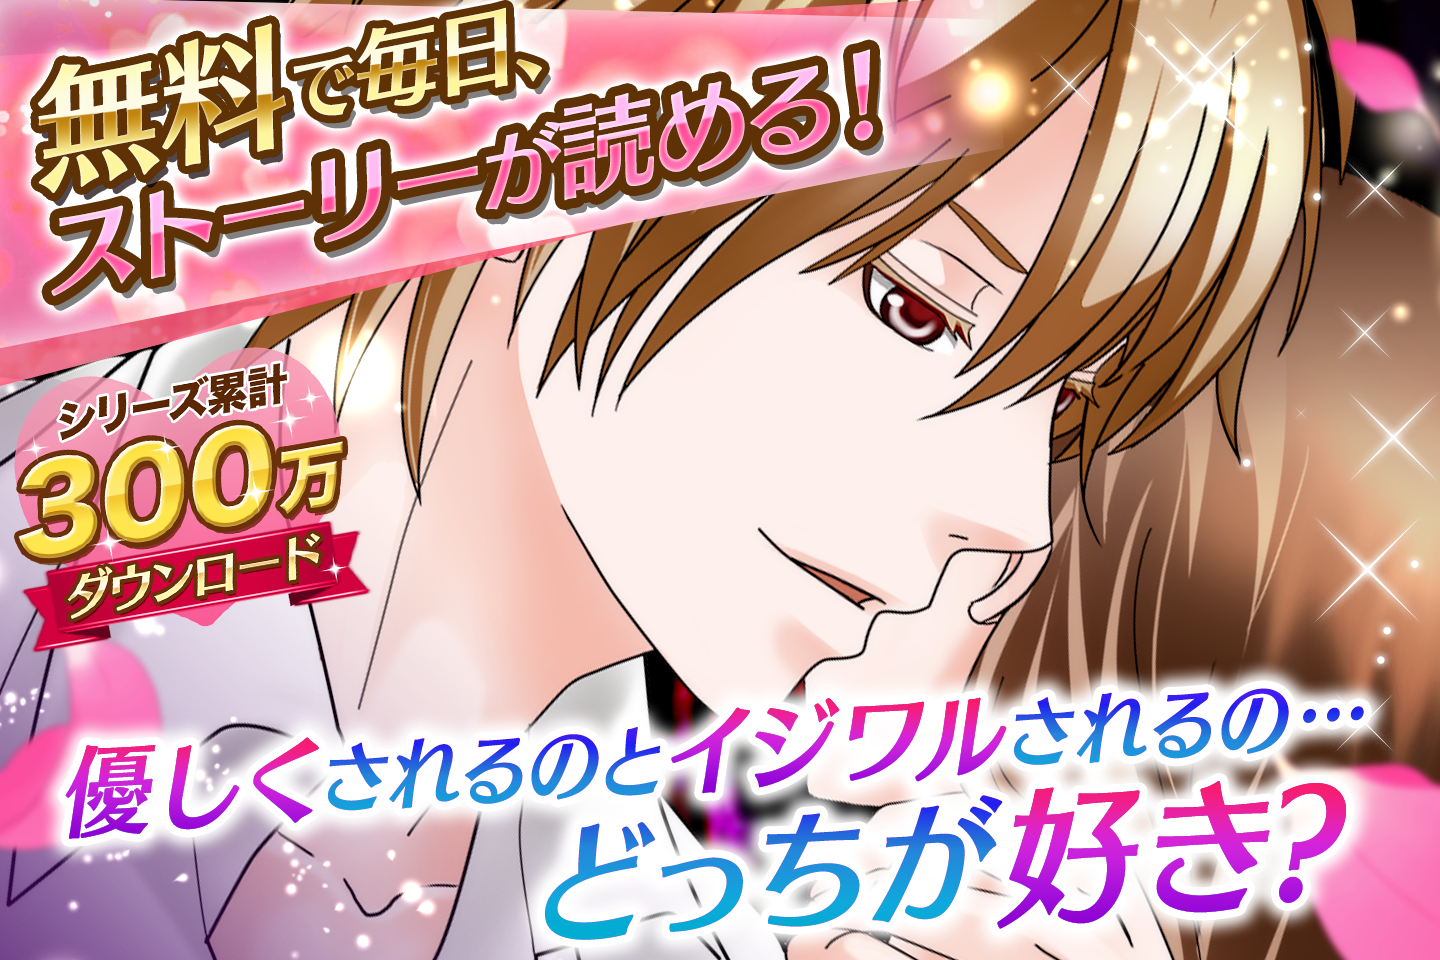 Screenshot 1 of Never Ending Love Delicious Kiss Dating game free for women! Popular Otome game 1.1.1